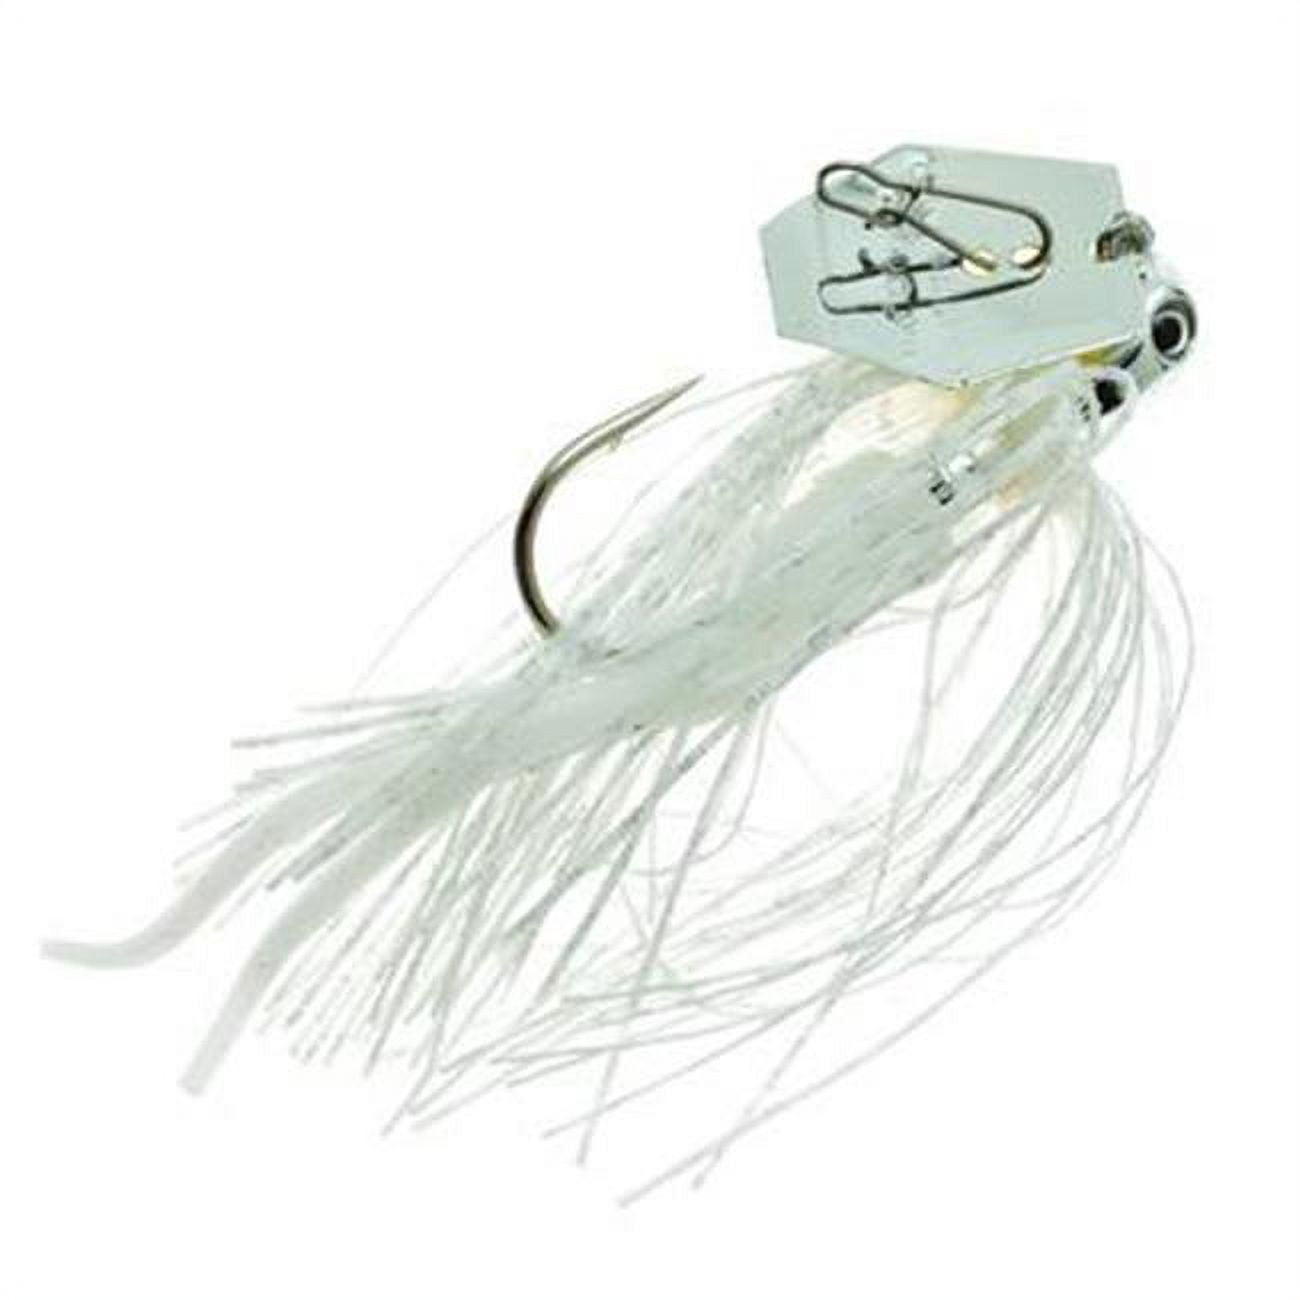 0.73 oz 18-01 Chatter Bait Micro Lures - White 